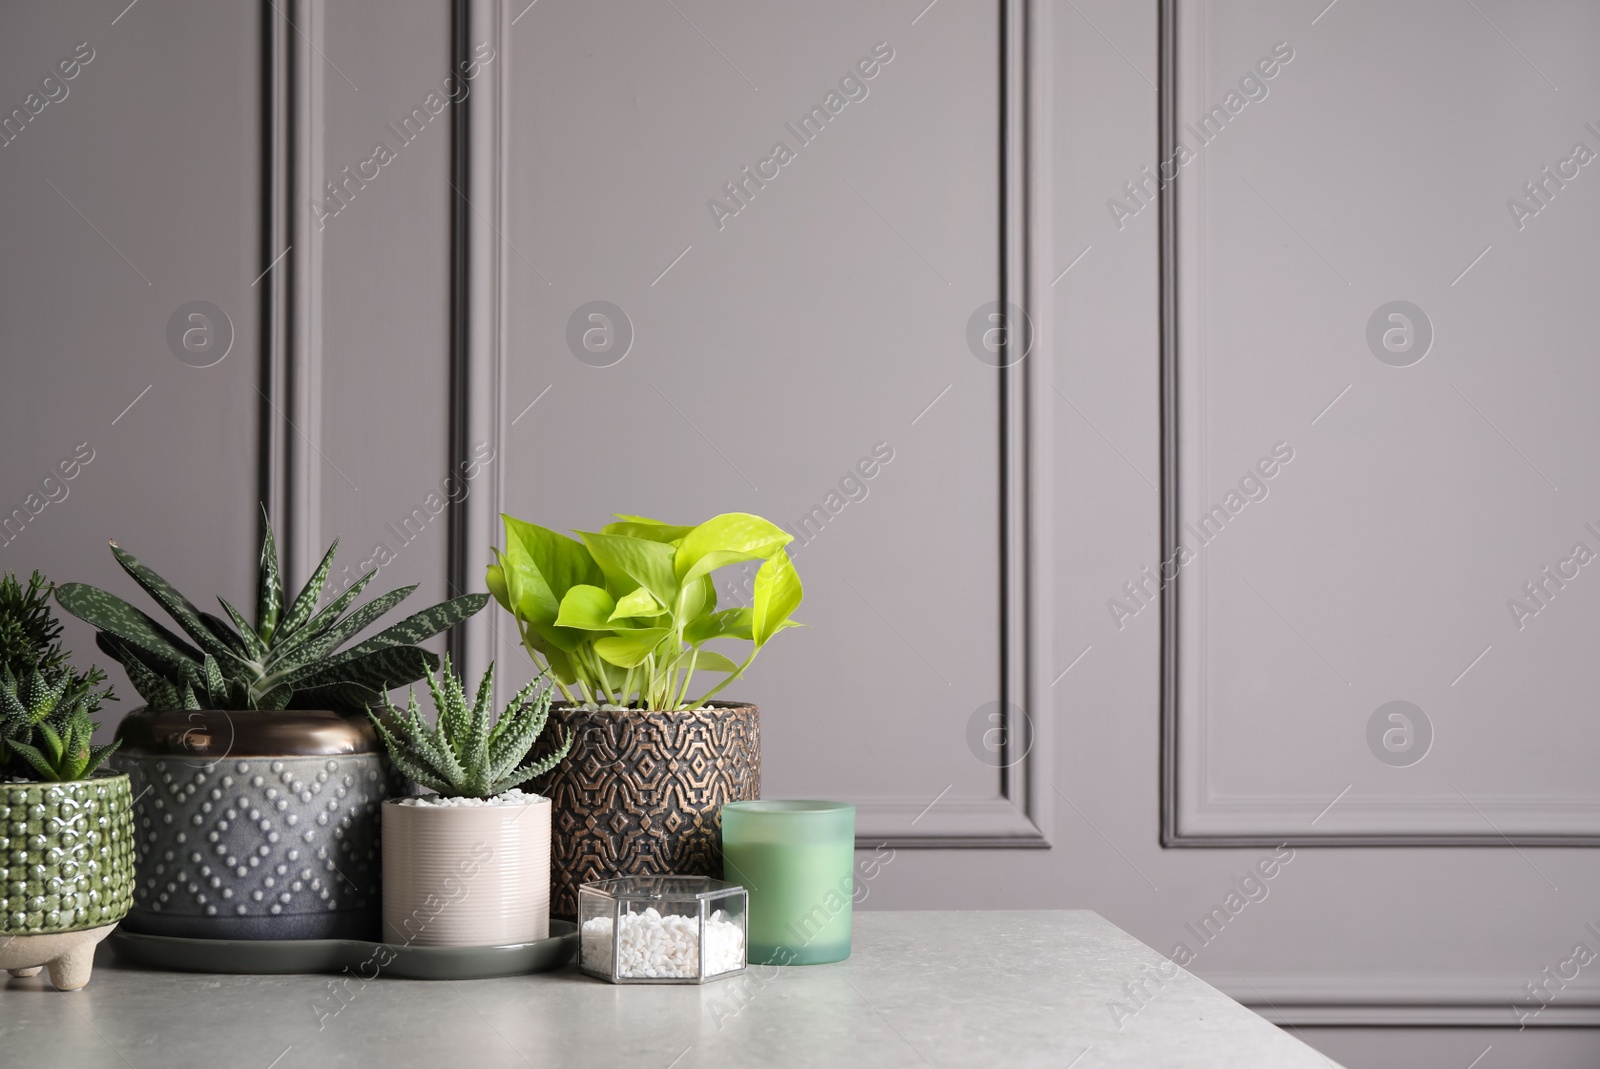 Photo of Different house plants in pots with decor on light table. Space for text